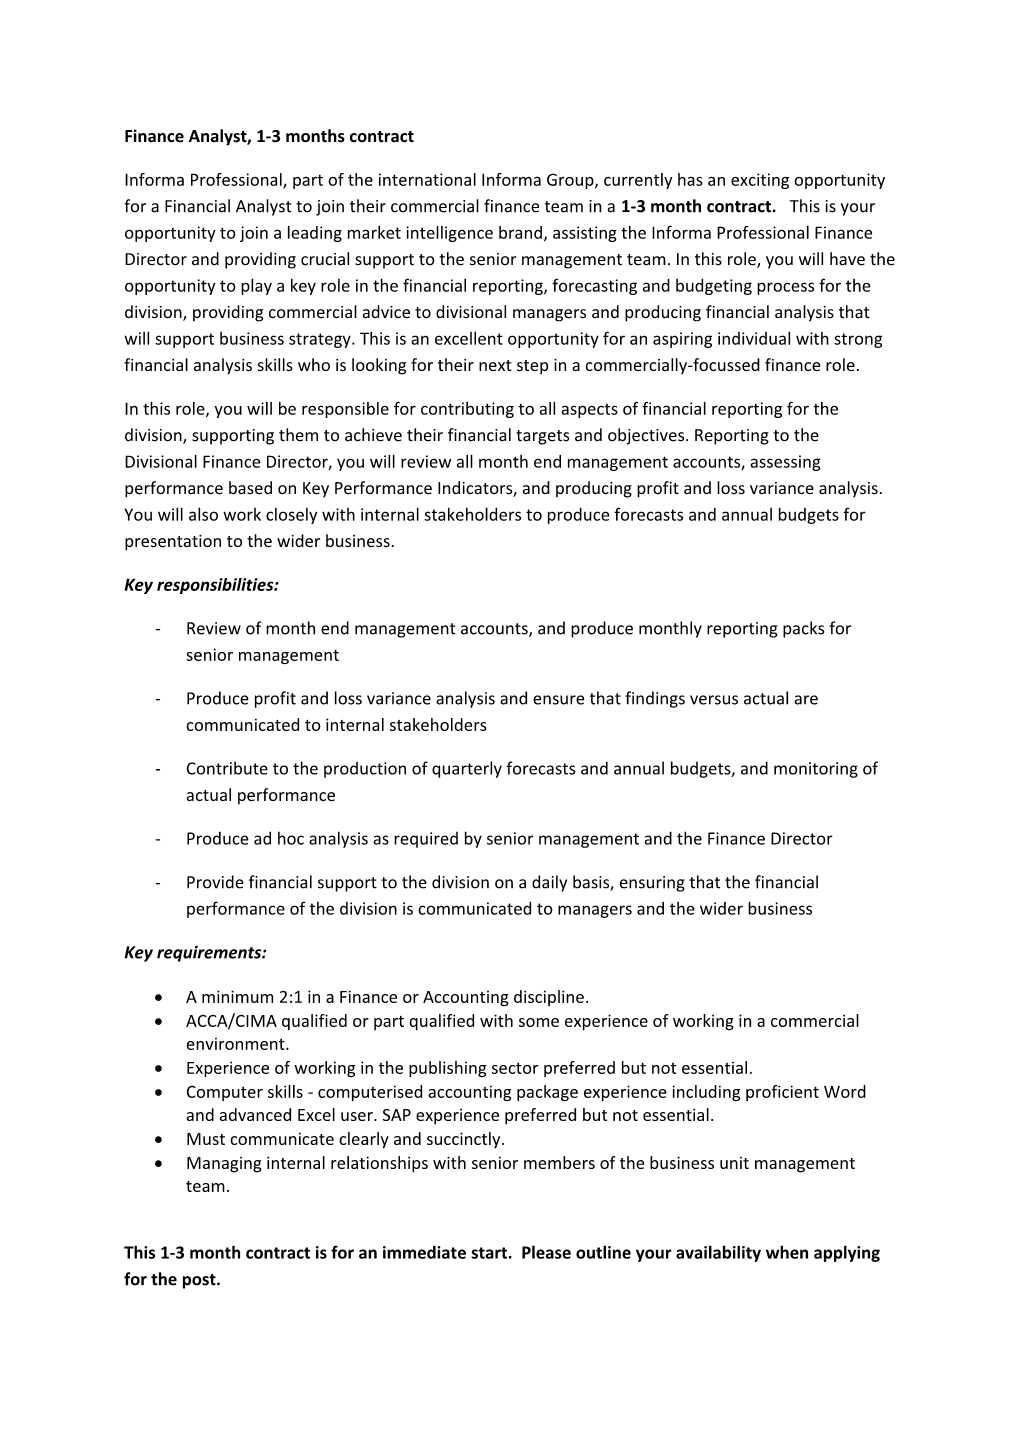 Finance Analyst, 1-3 Months Contract